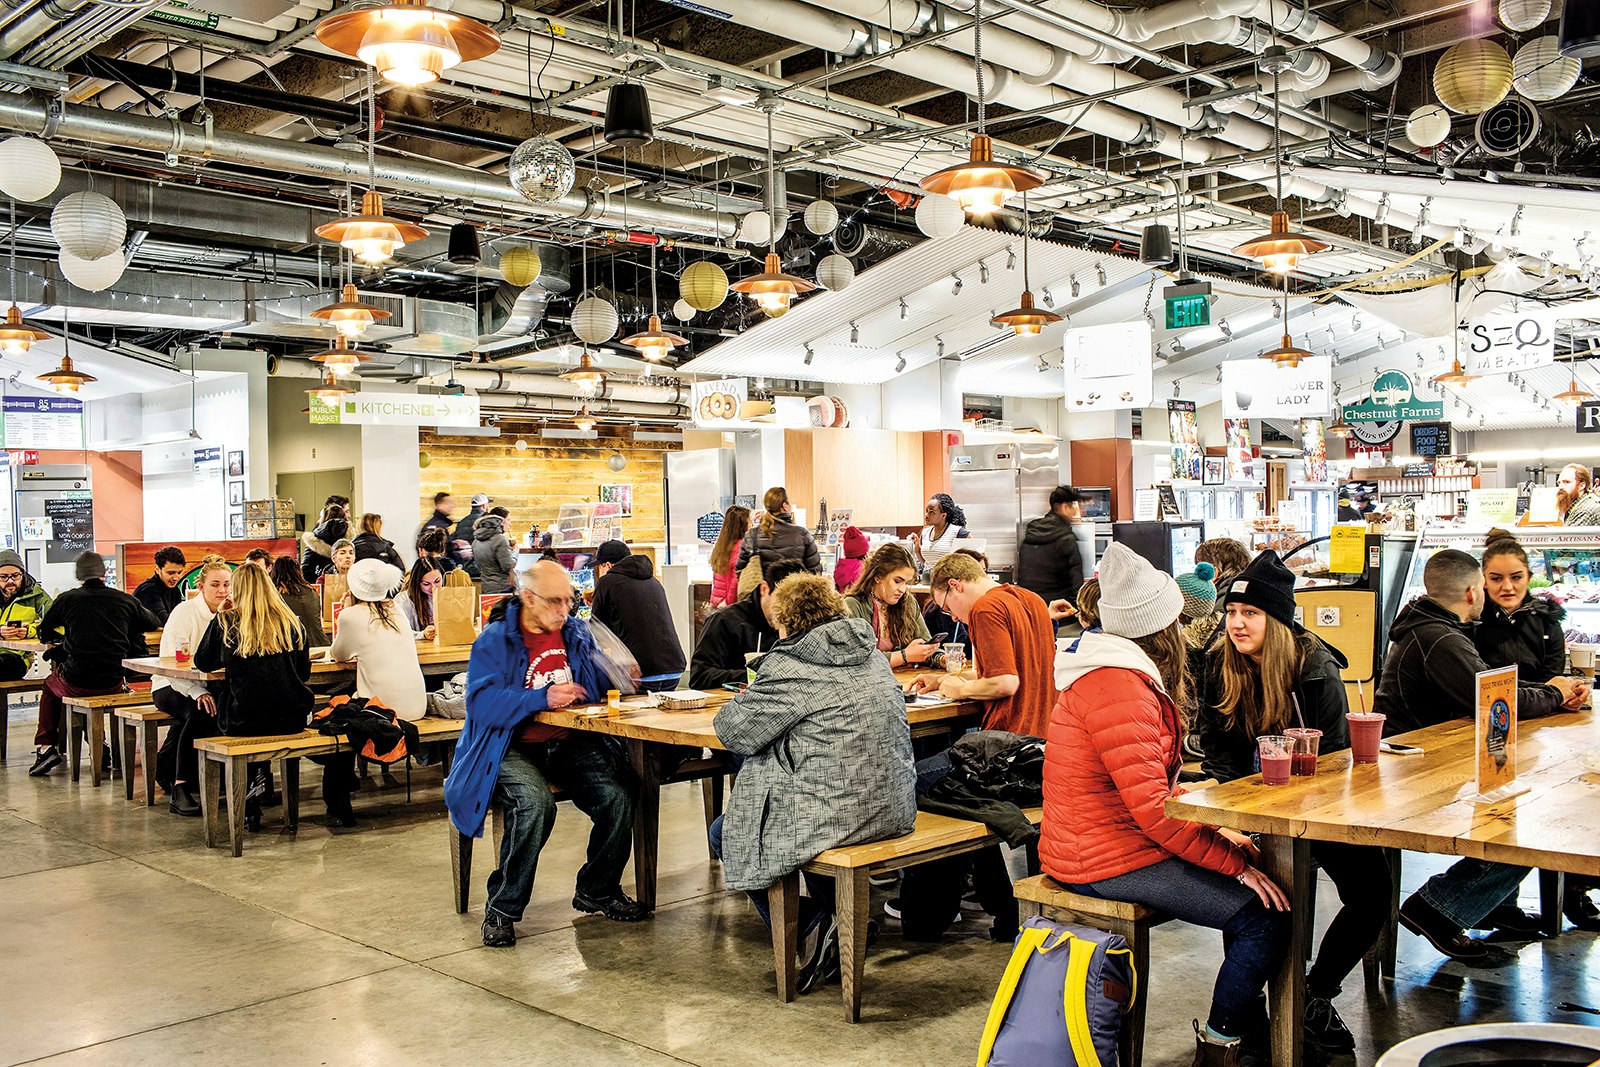 interior shot of a food hall, with people sitting at communal tables to dine © Adam DeTour / Lonely Planet